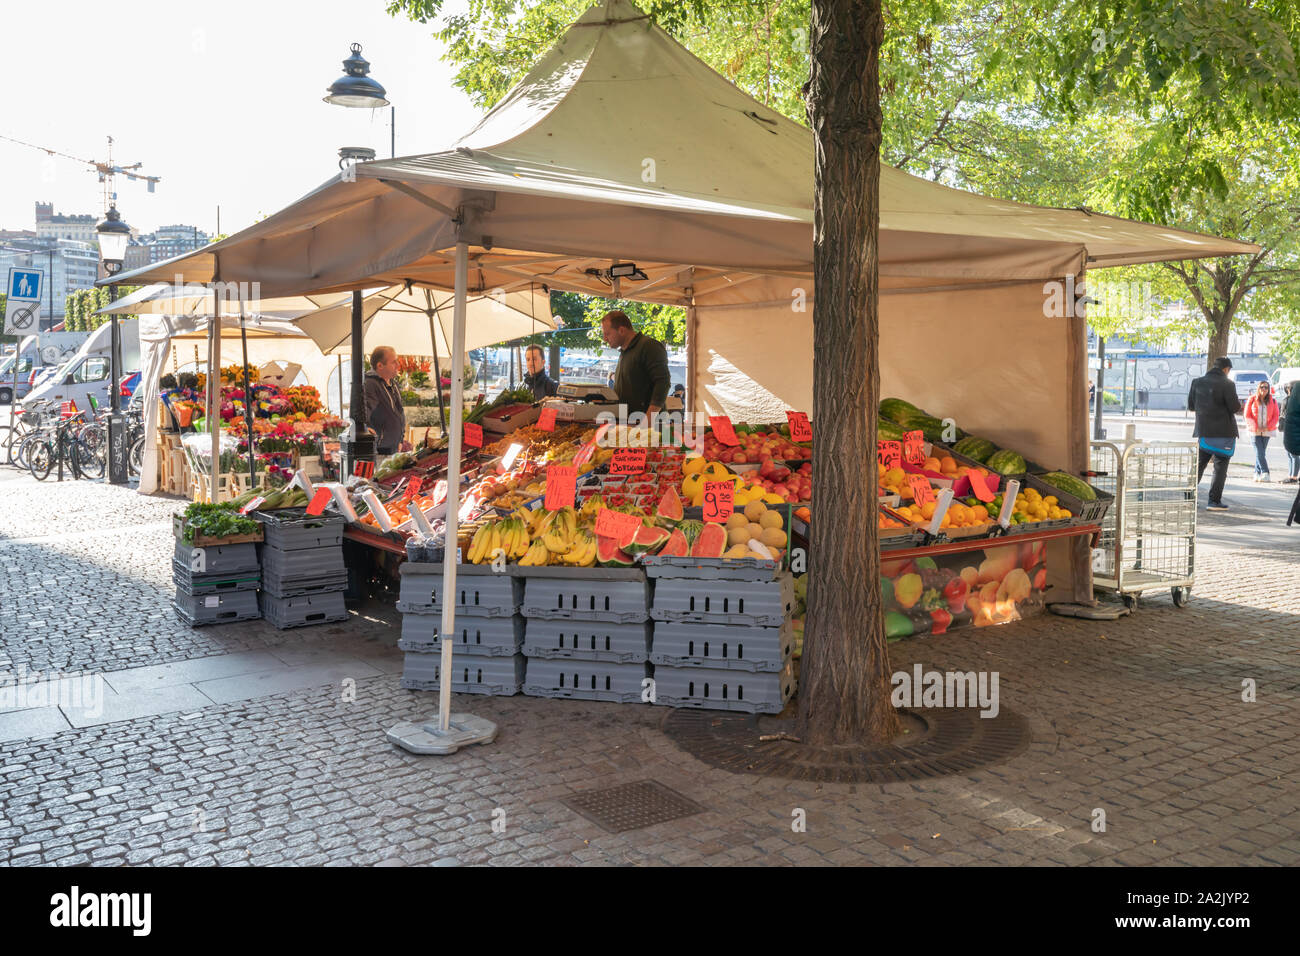 Stockholm, Sweden: A fruit stall with a white awning has produce stacked on  crates. All are sheltered beneath a tree. Three men converse Stock Photo -  Alamy